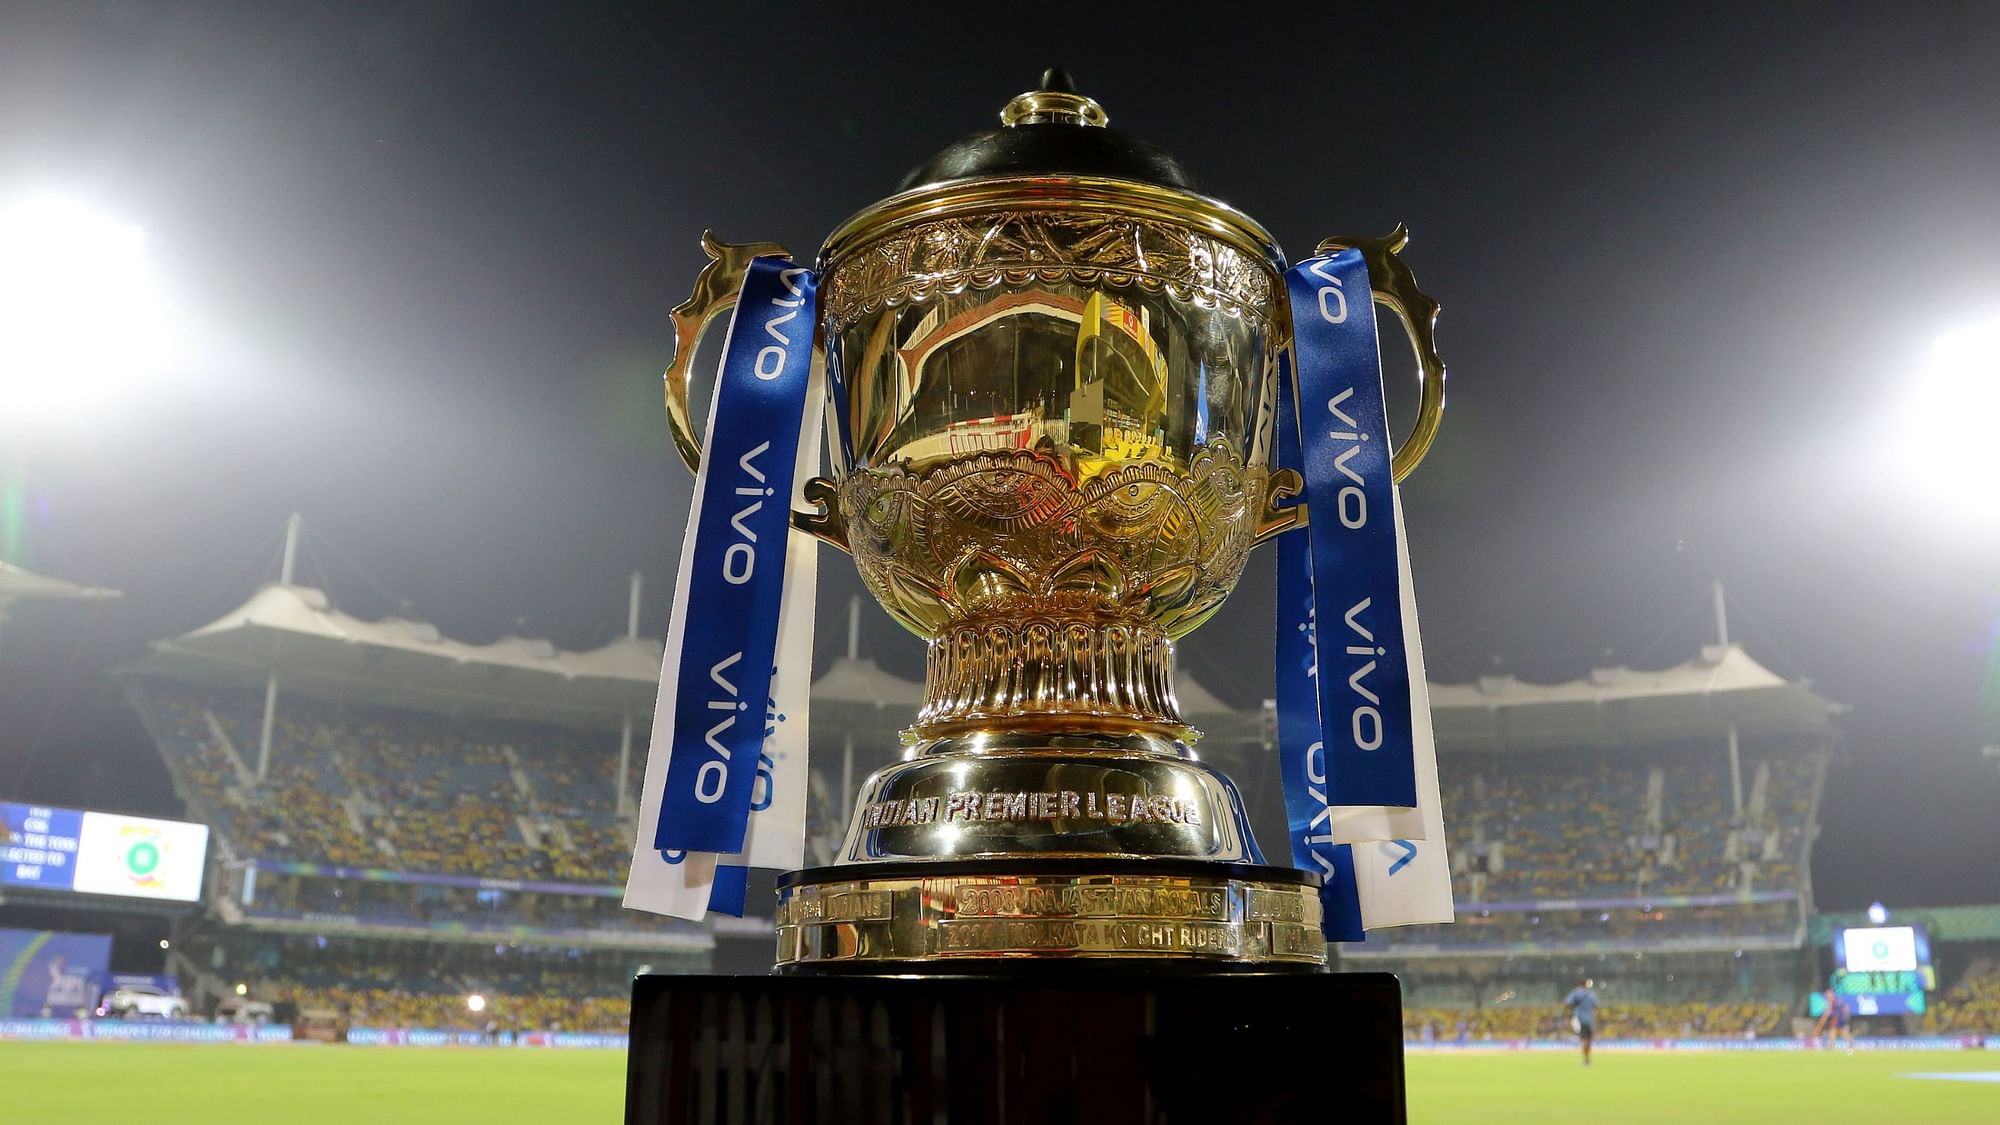 BCCI and Vivo have suspended their partnership for IPL in 2020.